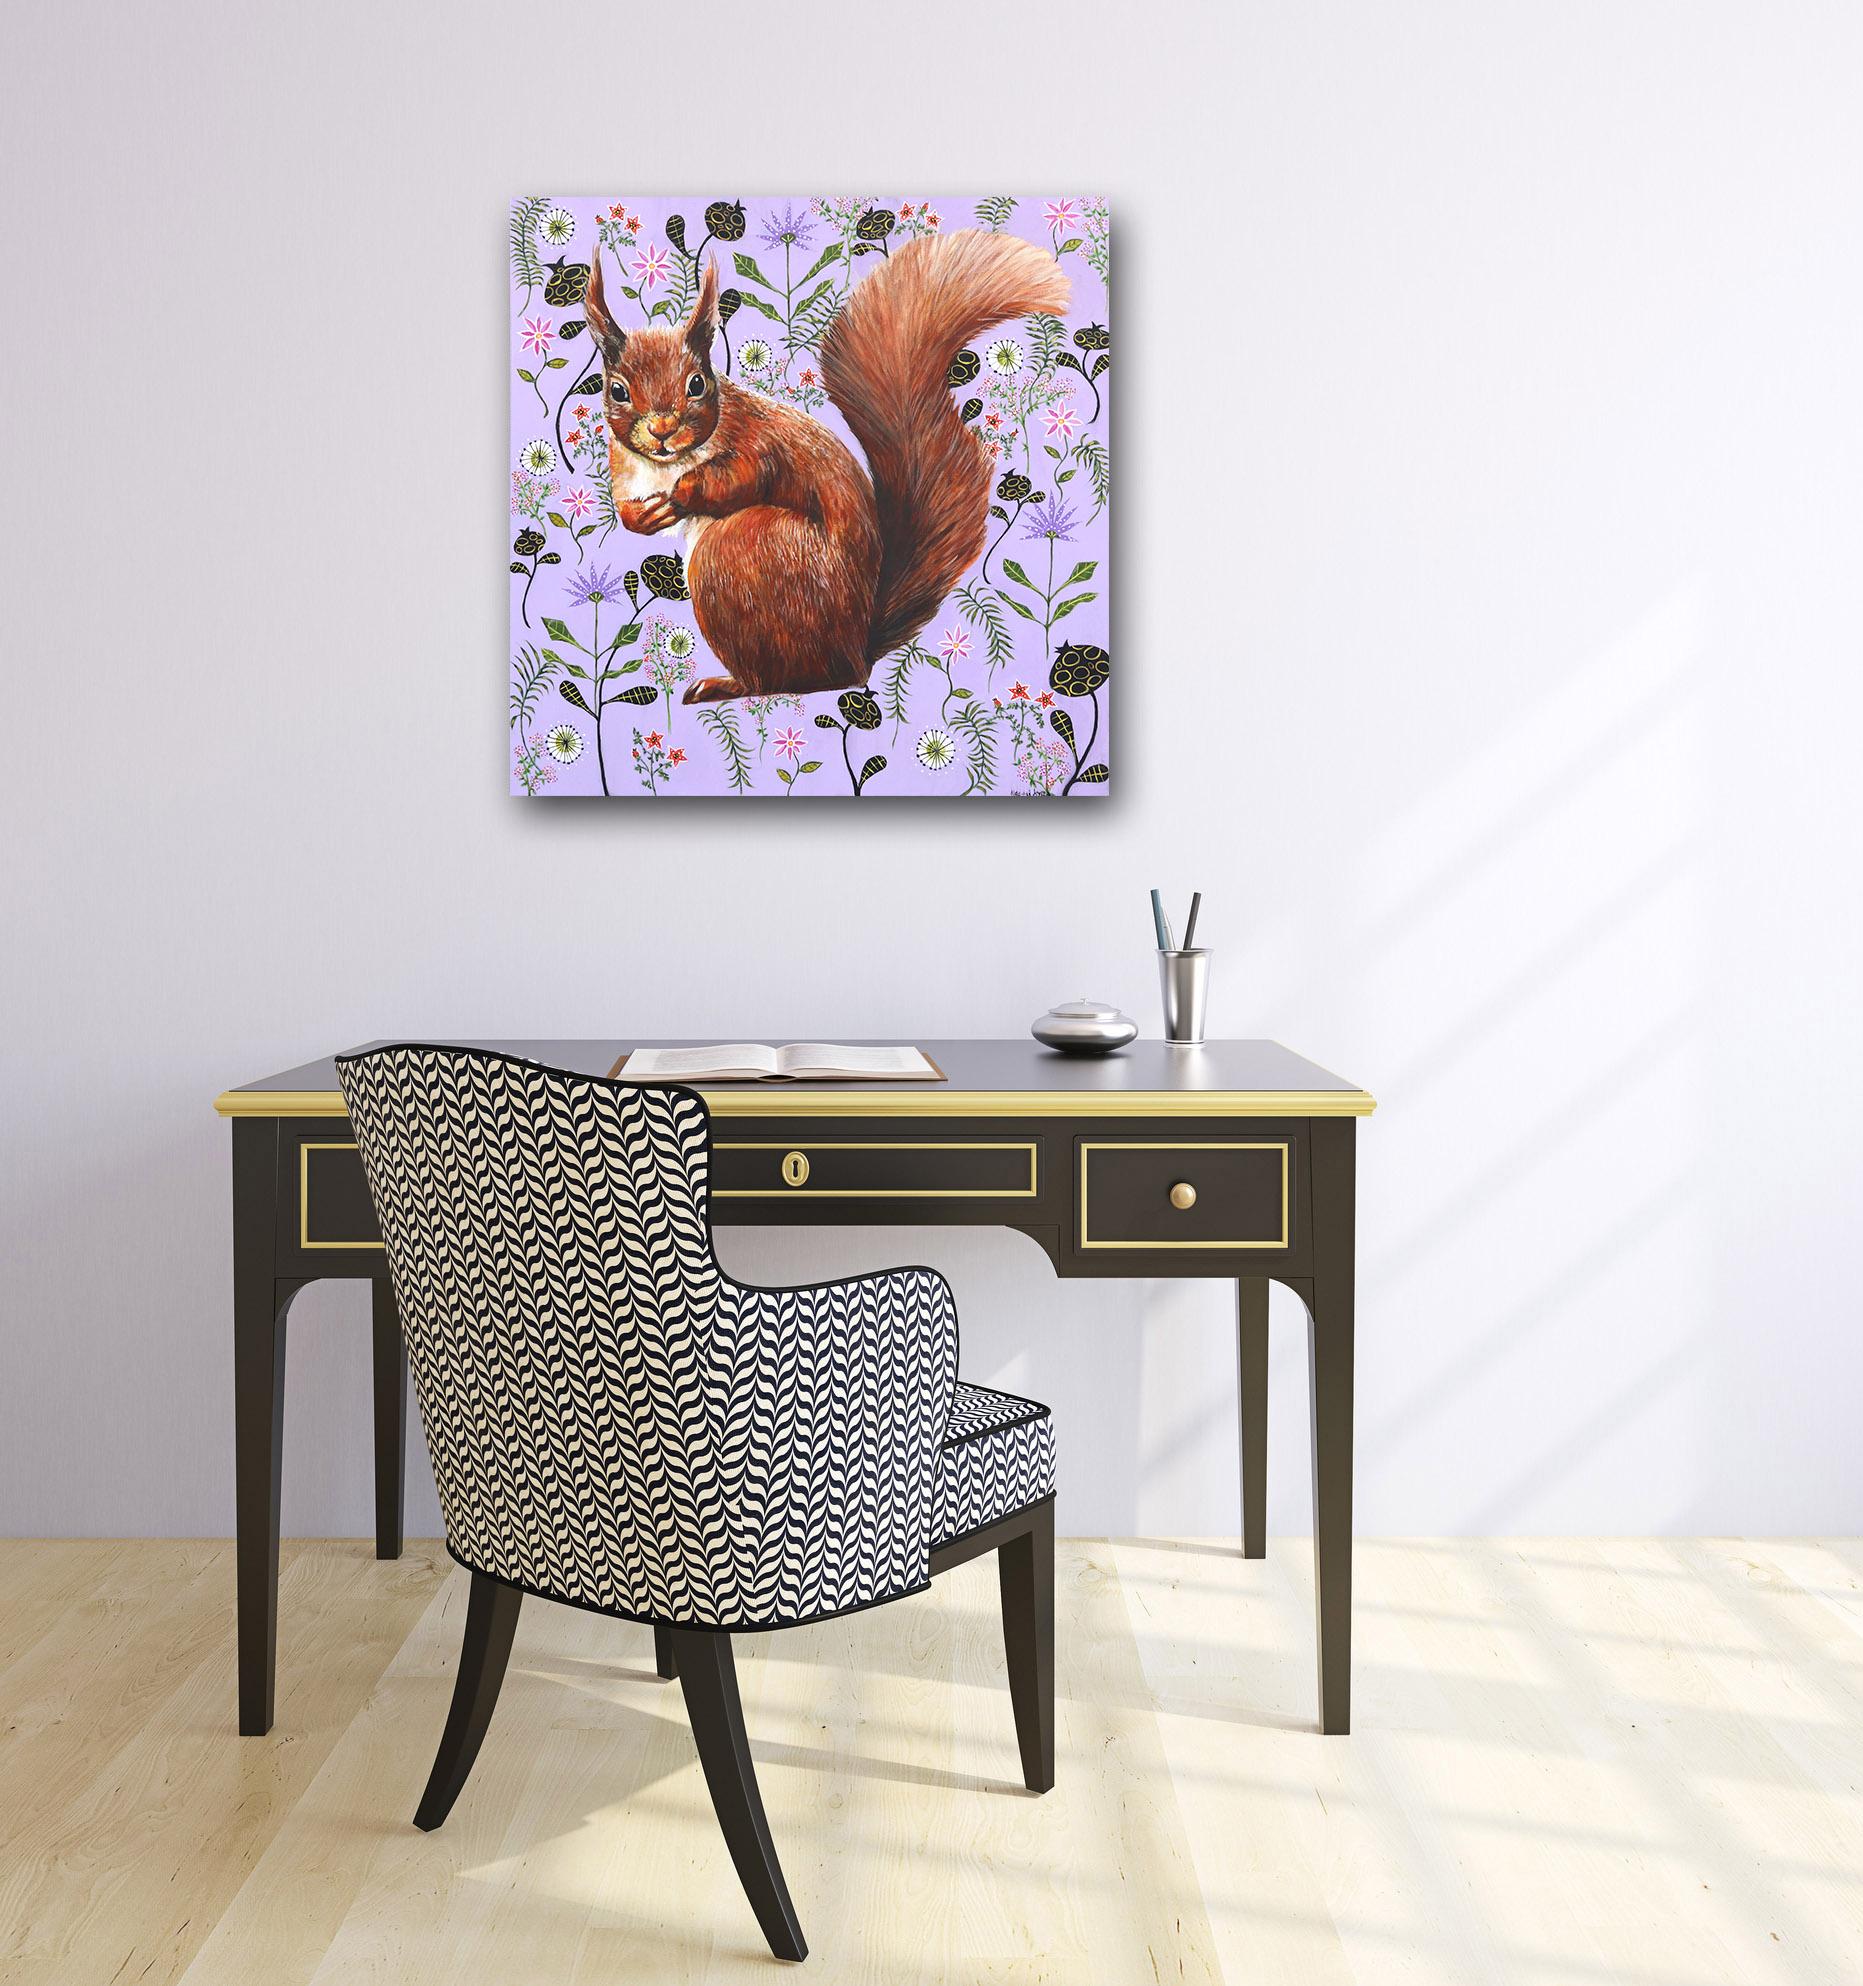 Red Squirrel on Lavender  - Original Vivid Figurative Animal Painting on Canvas For Sale 4